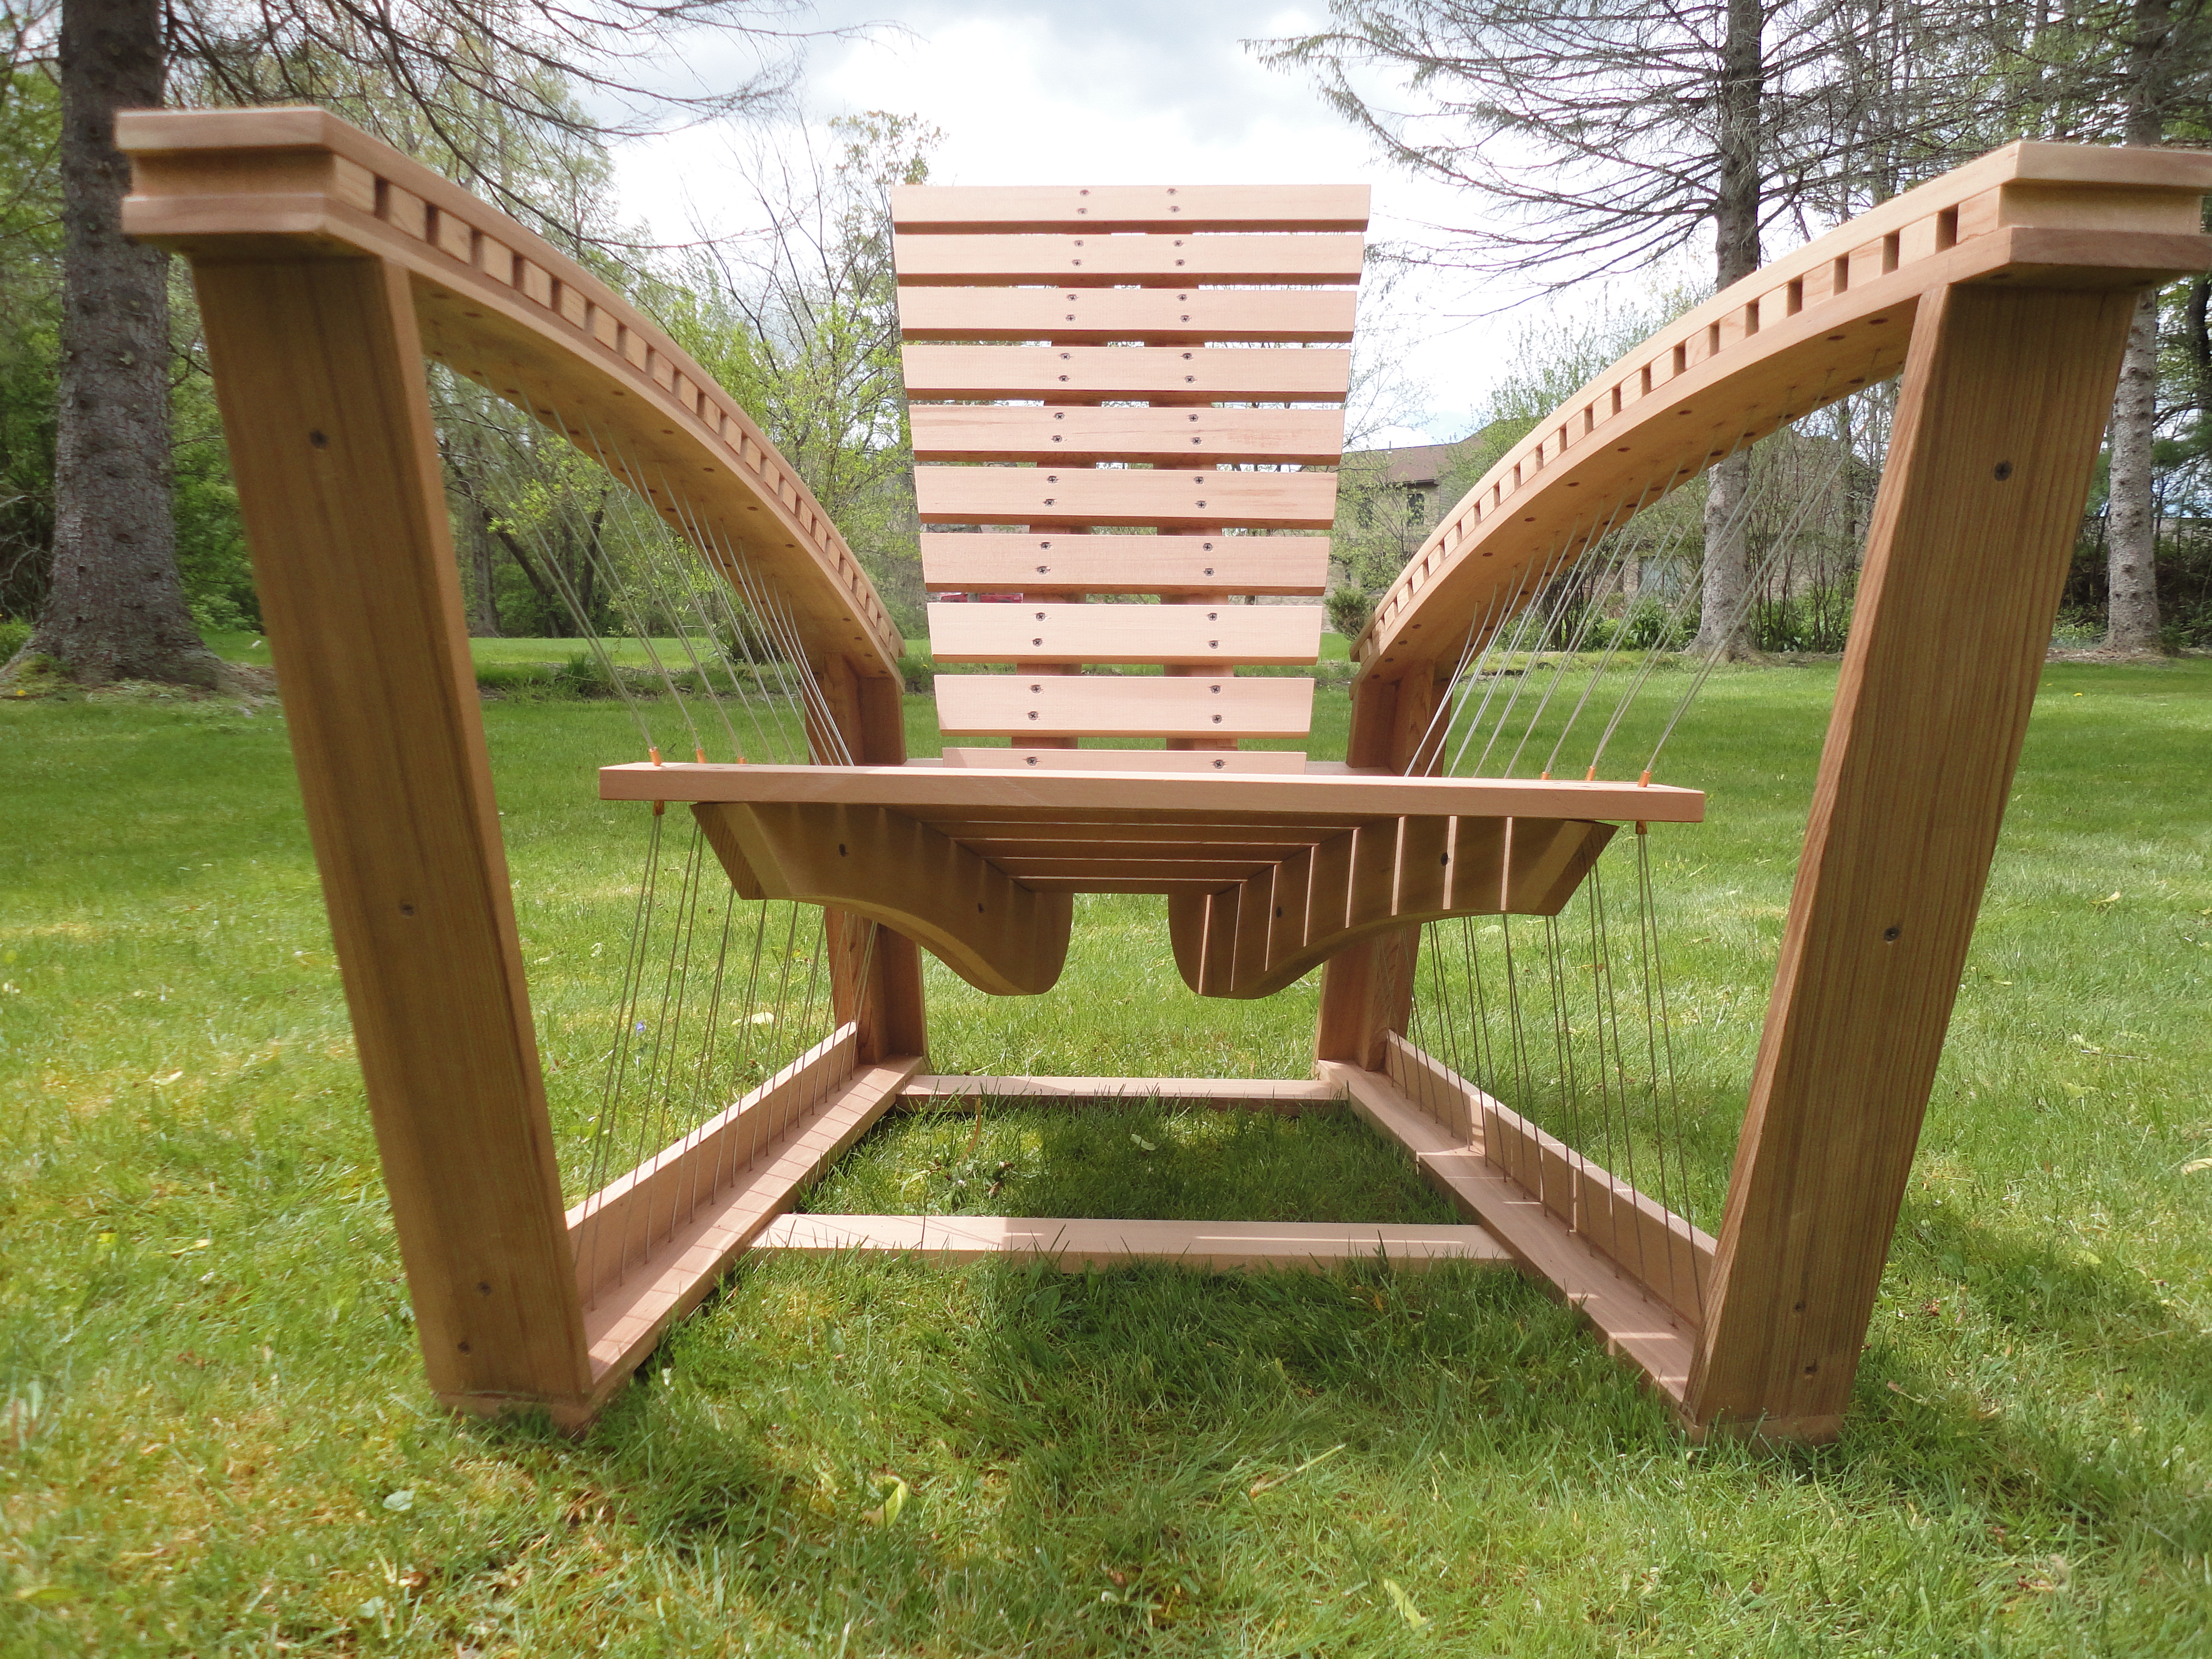 Woodworking how to build adirondack lounge chair PDF Free Download